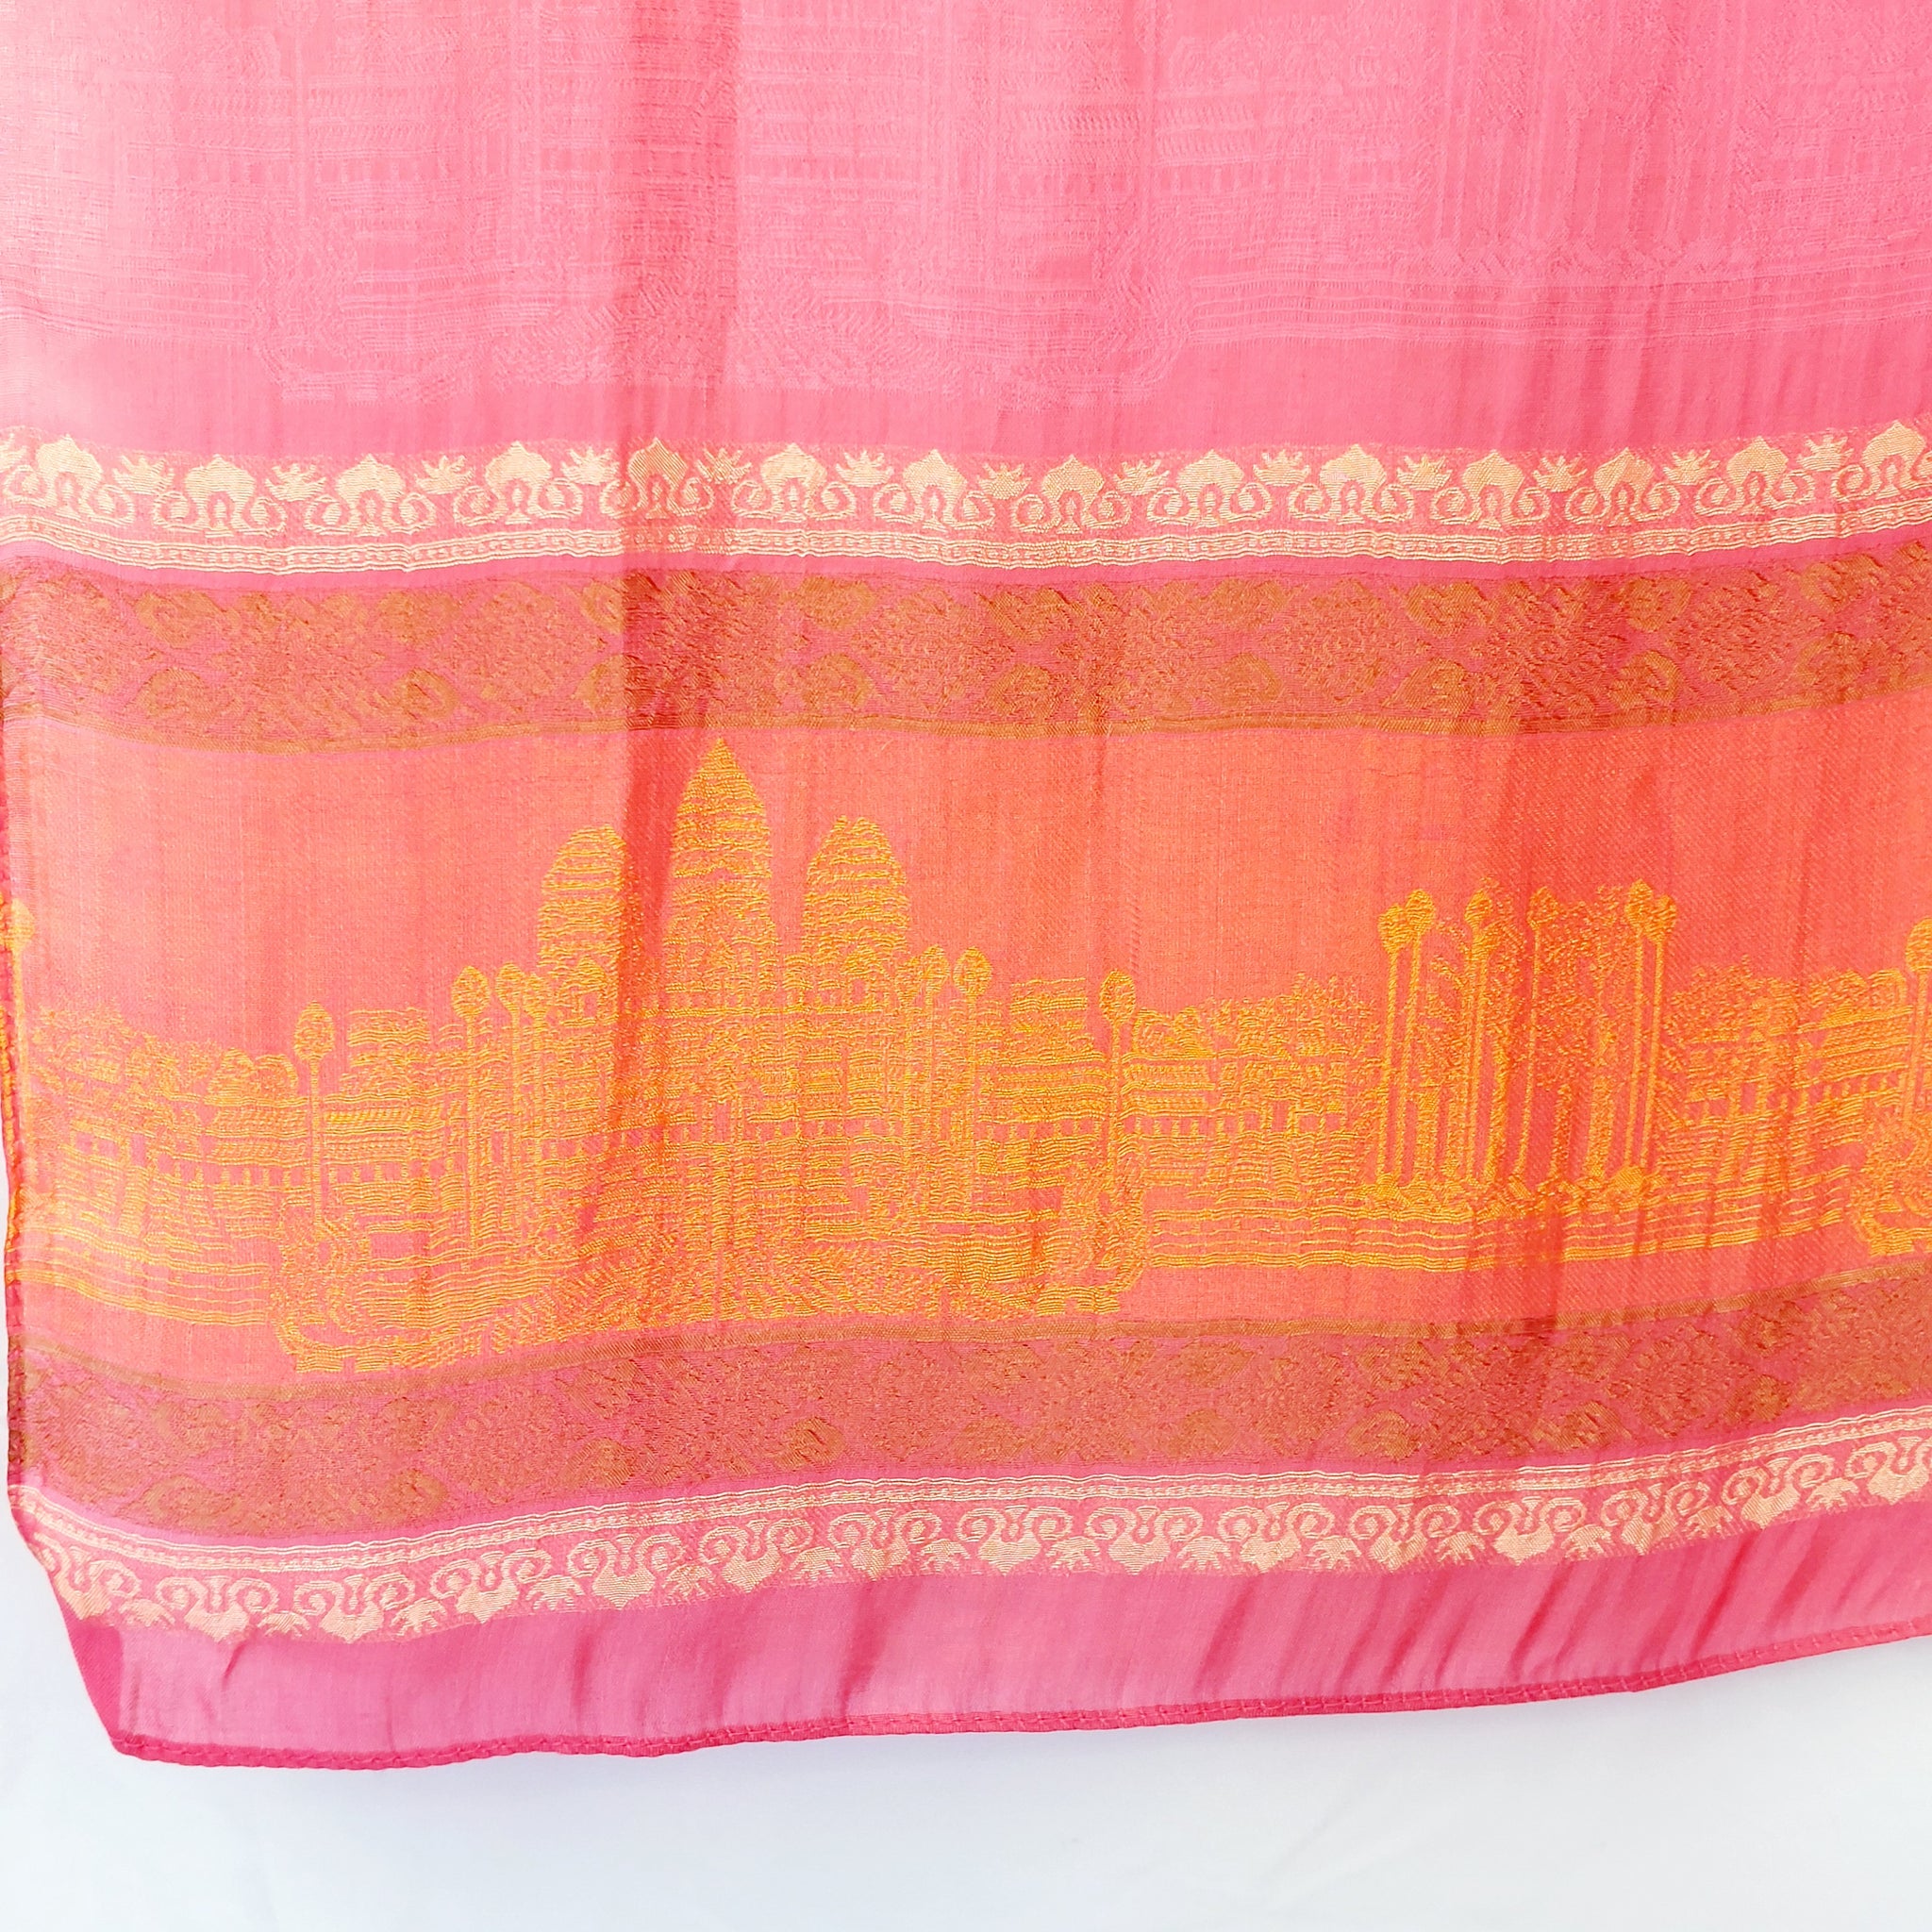 CAMBODIA PINK SCARF